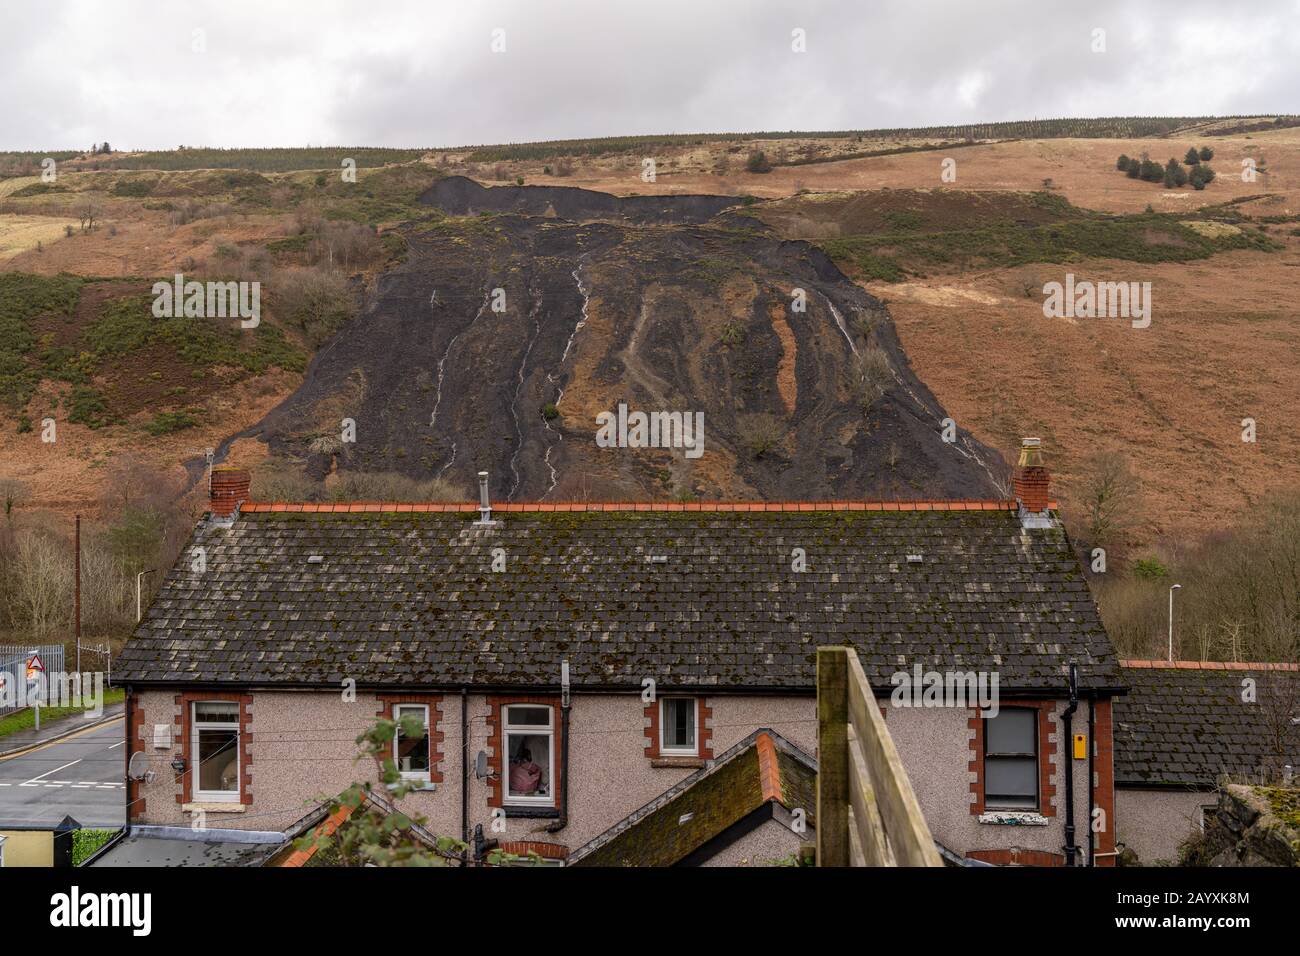 South Wales Valleys, UK. 17th February 2020.  Landslides from post industrial waste tips, known as coal slag heaps, brought on by torrential rain during storm Dennis cause concern across the South Wales Valleys. Credit: Haydn Denman/Alamy Live News. Stock Photo